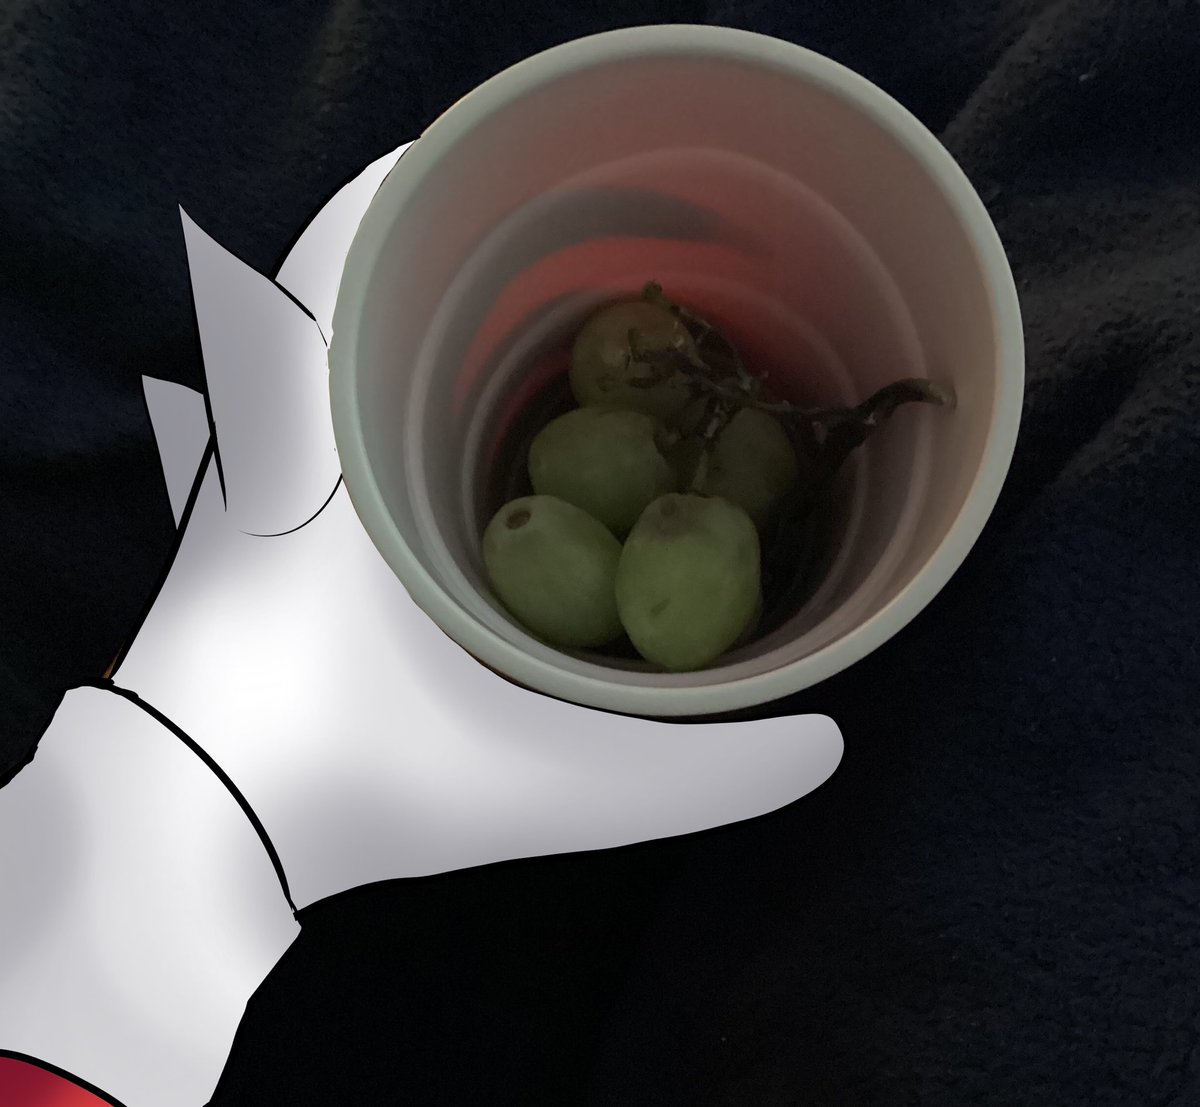 Sonic greeted me with a cup of grapes 

I do not no why he chose a cup, but i accepted his gift with generosity